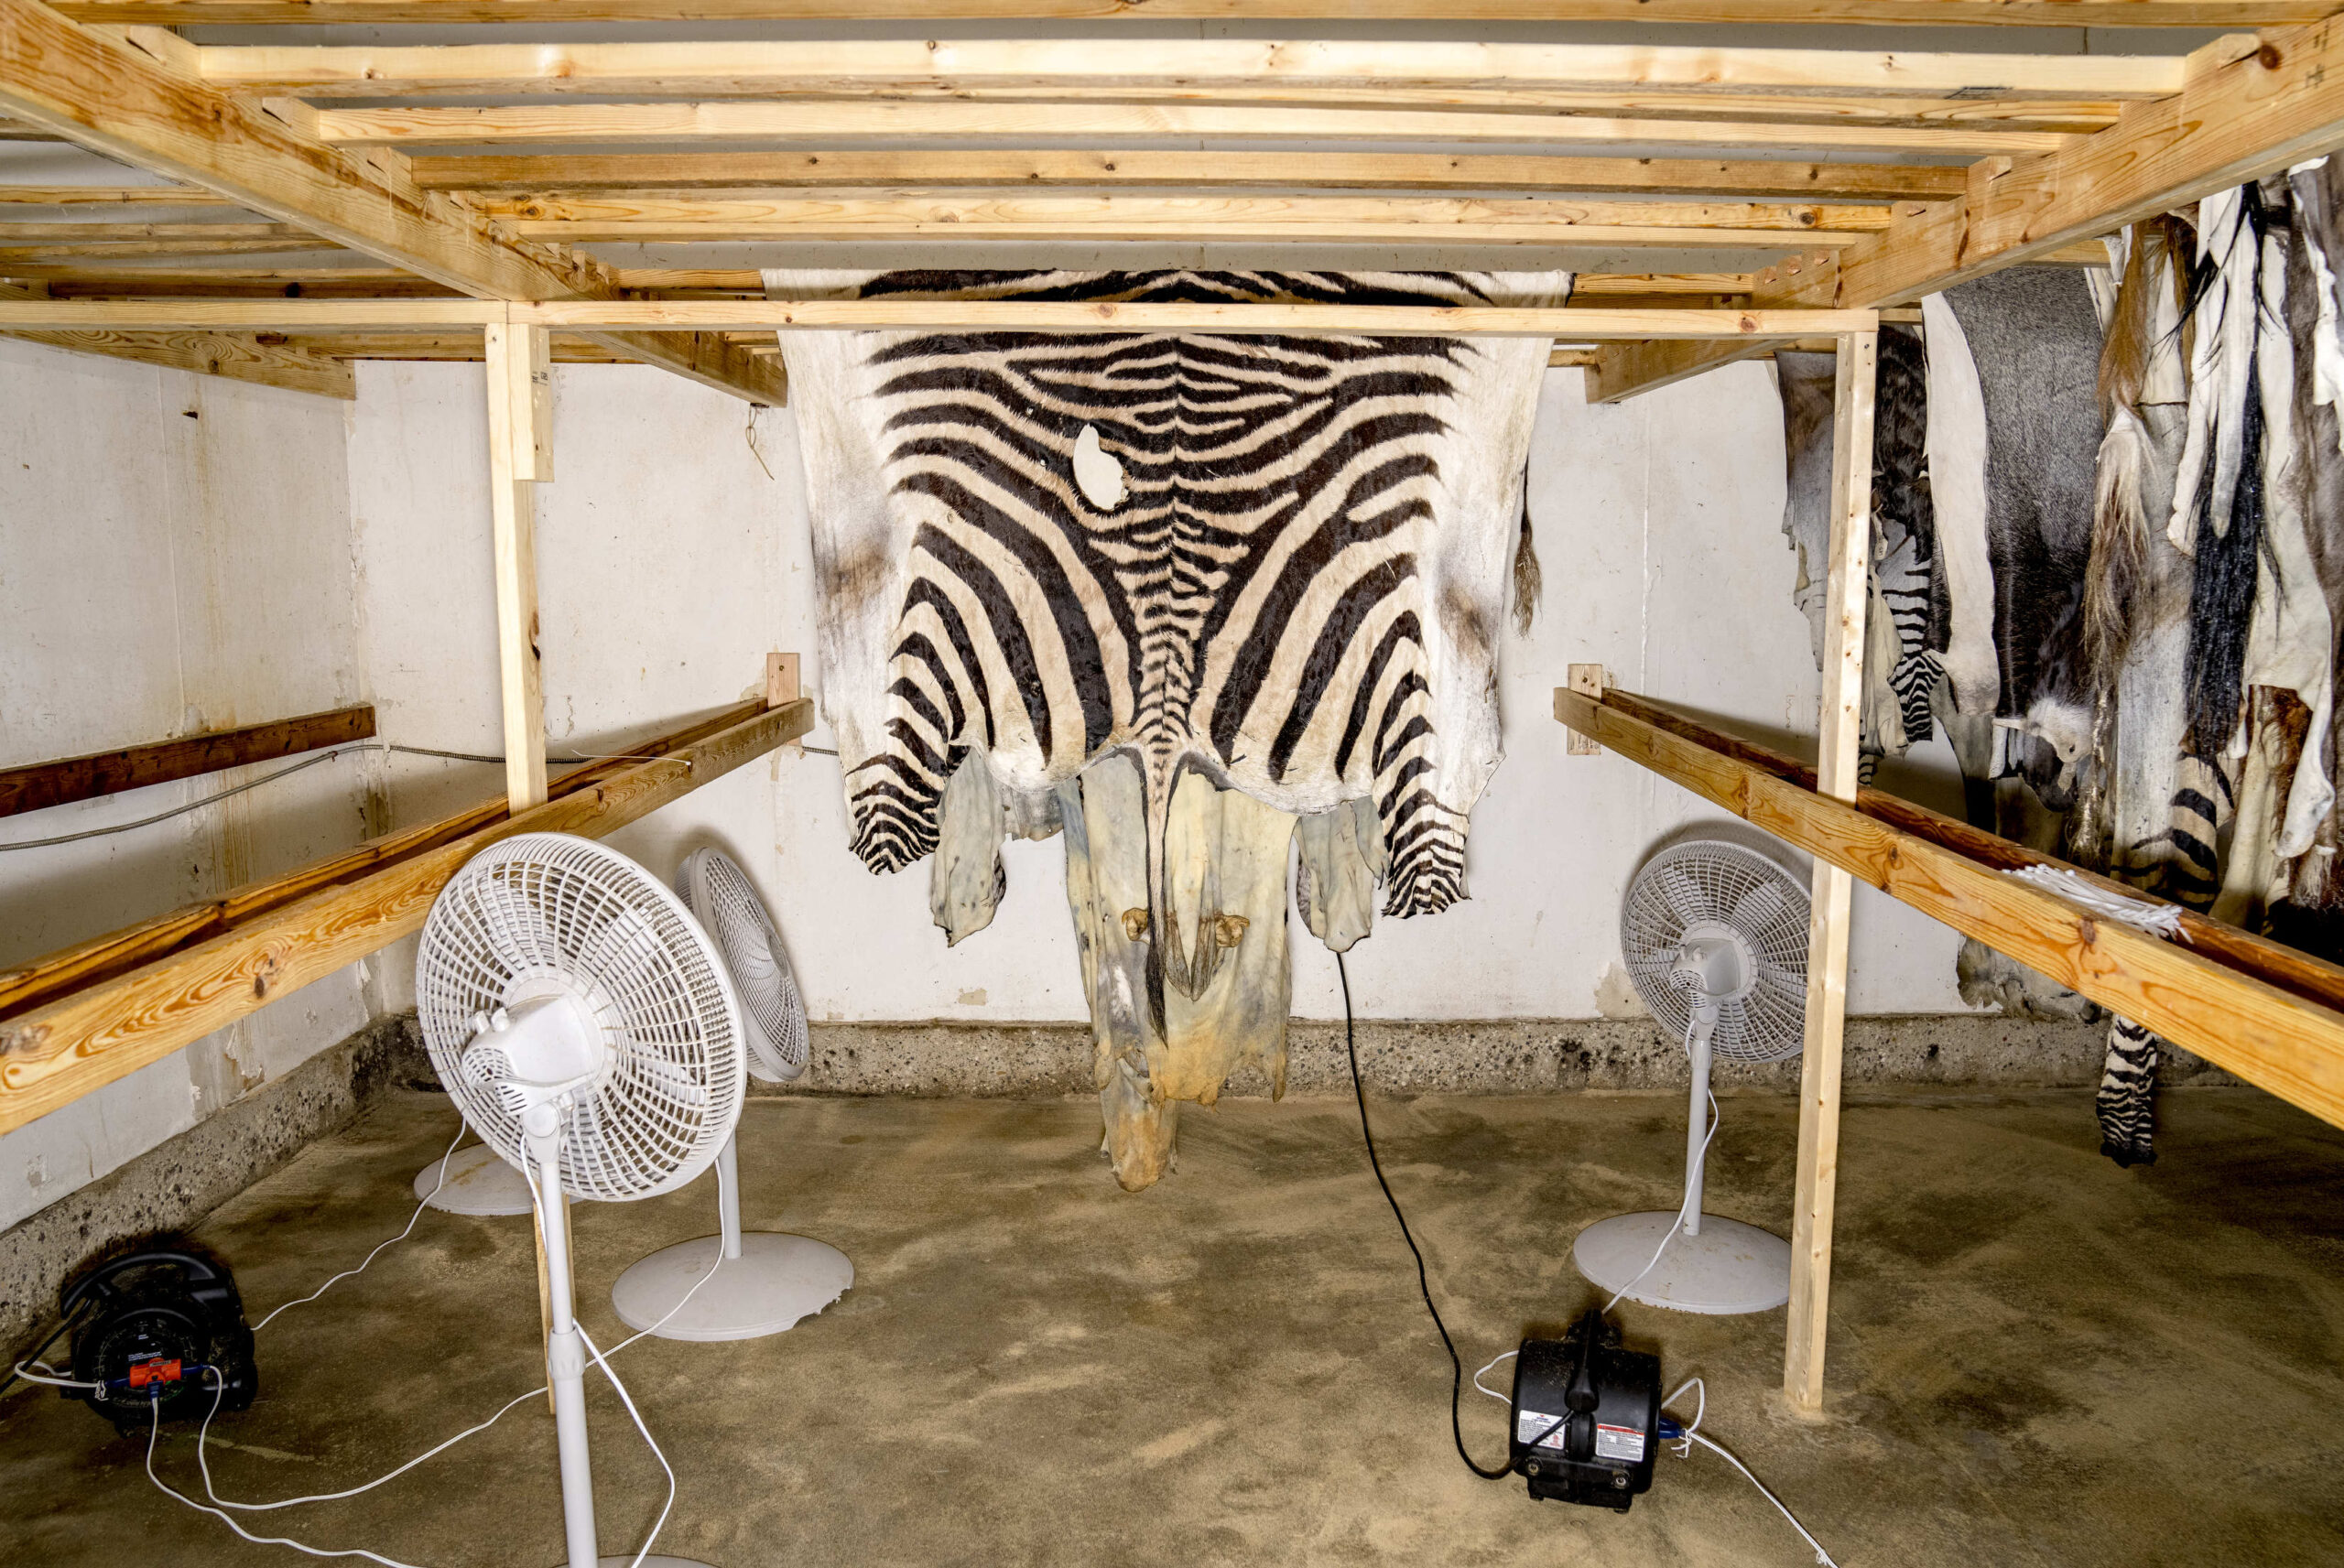 Drying a zebra hide at a tannery.